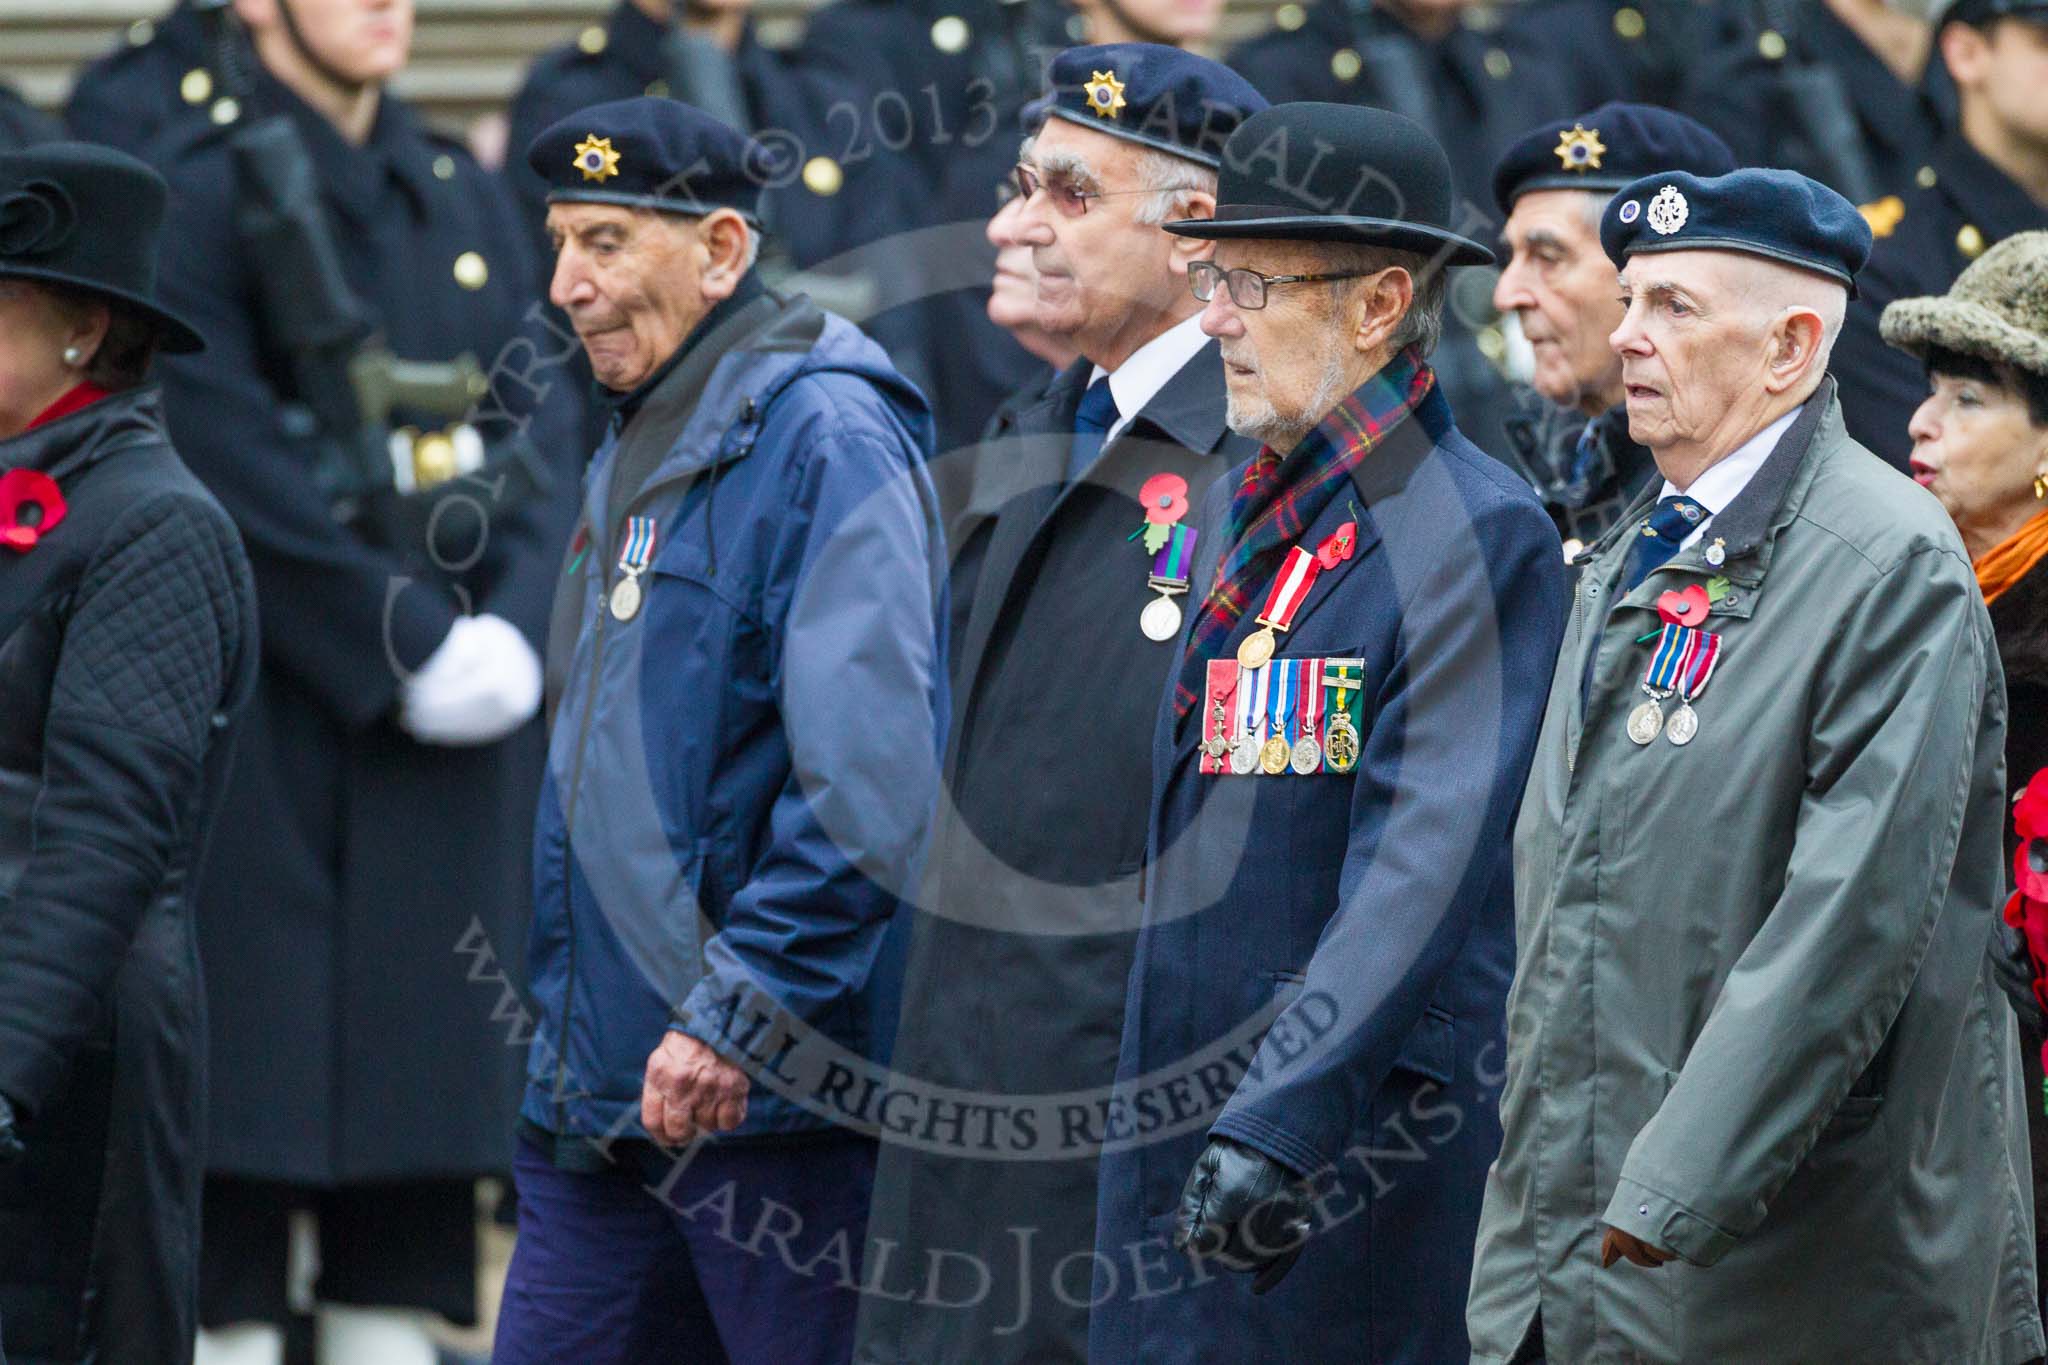 Remembrance Sunday at the Cenotaph 2015: Group D13, Association of Jewish Ex-Servicemen & Women.
Cenotaph, Whitehall, London SW1,
London,
Greater London,
United Kingdom,
on 08 November 2015 at 11:53, image #646